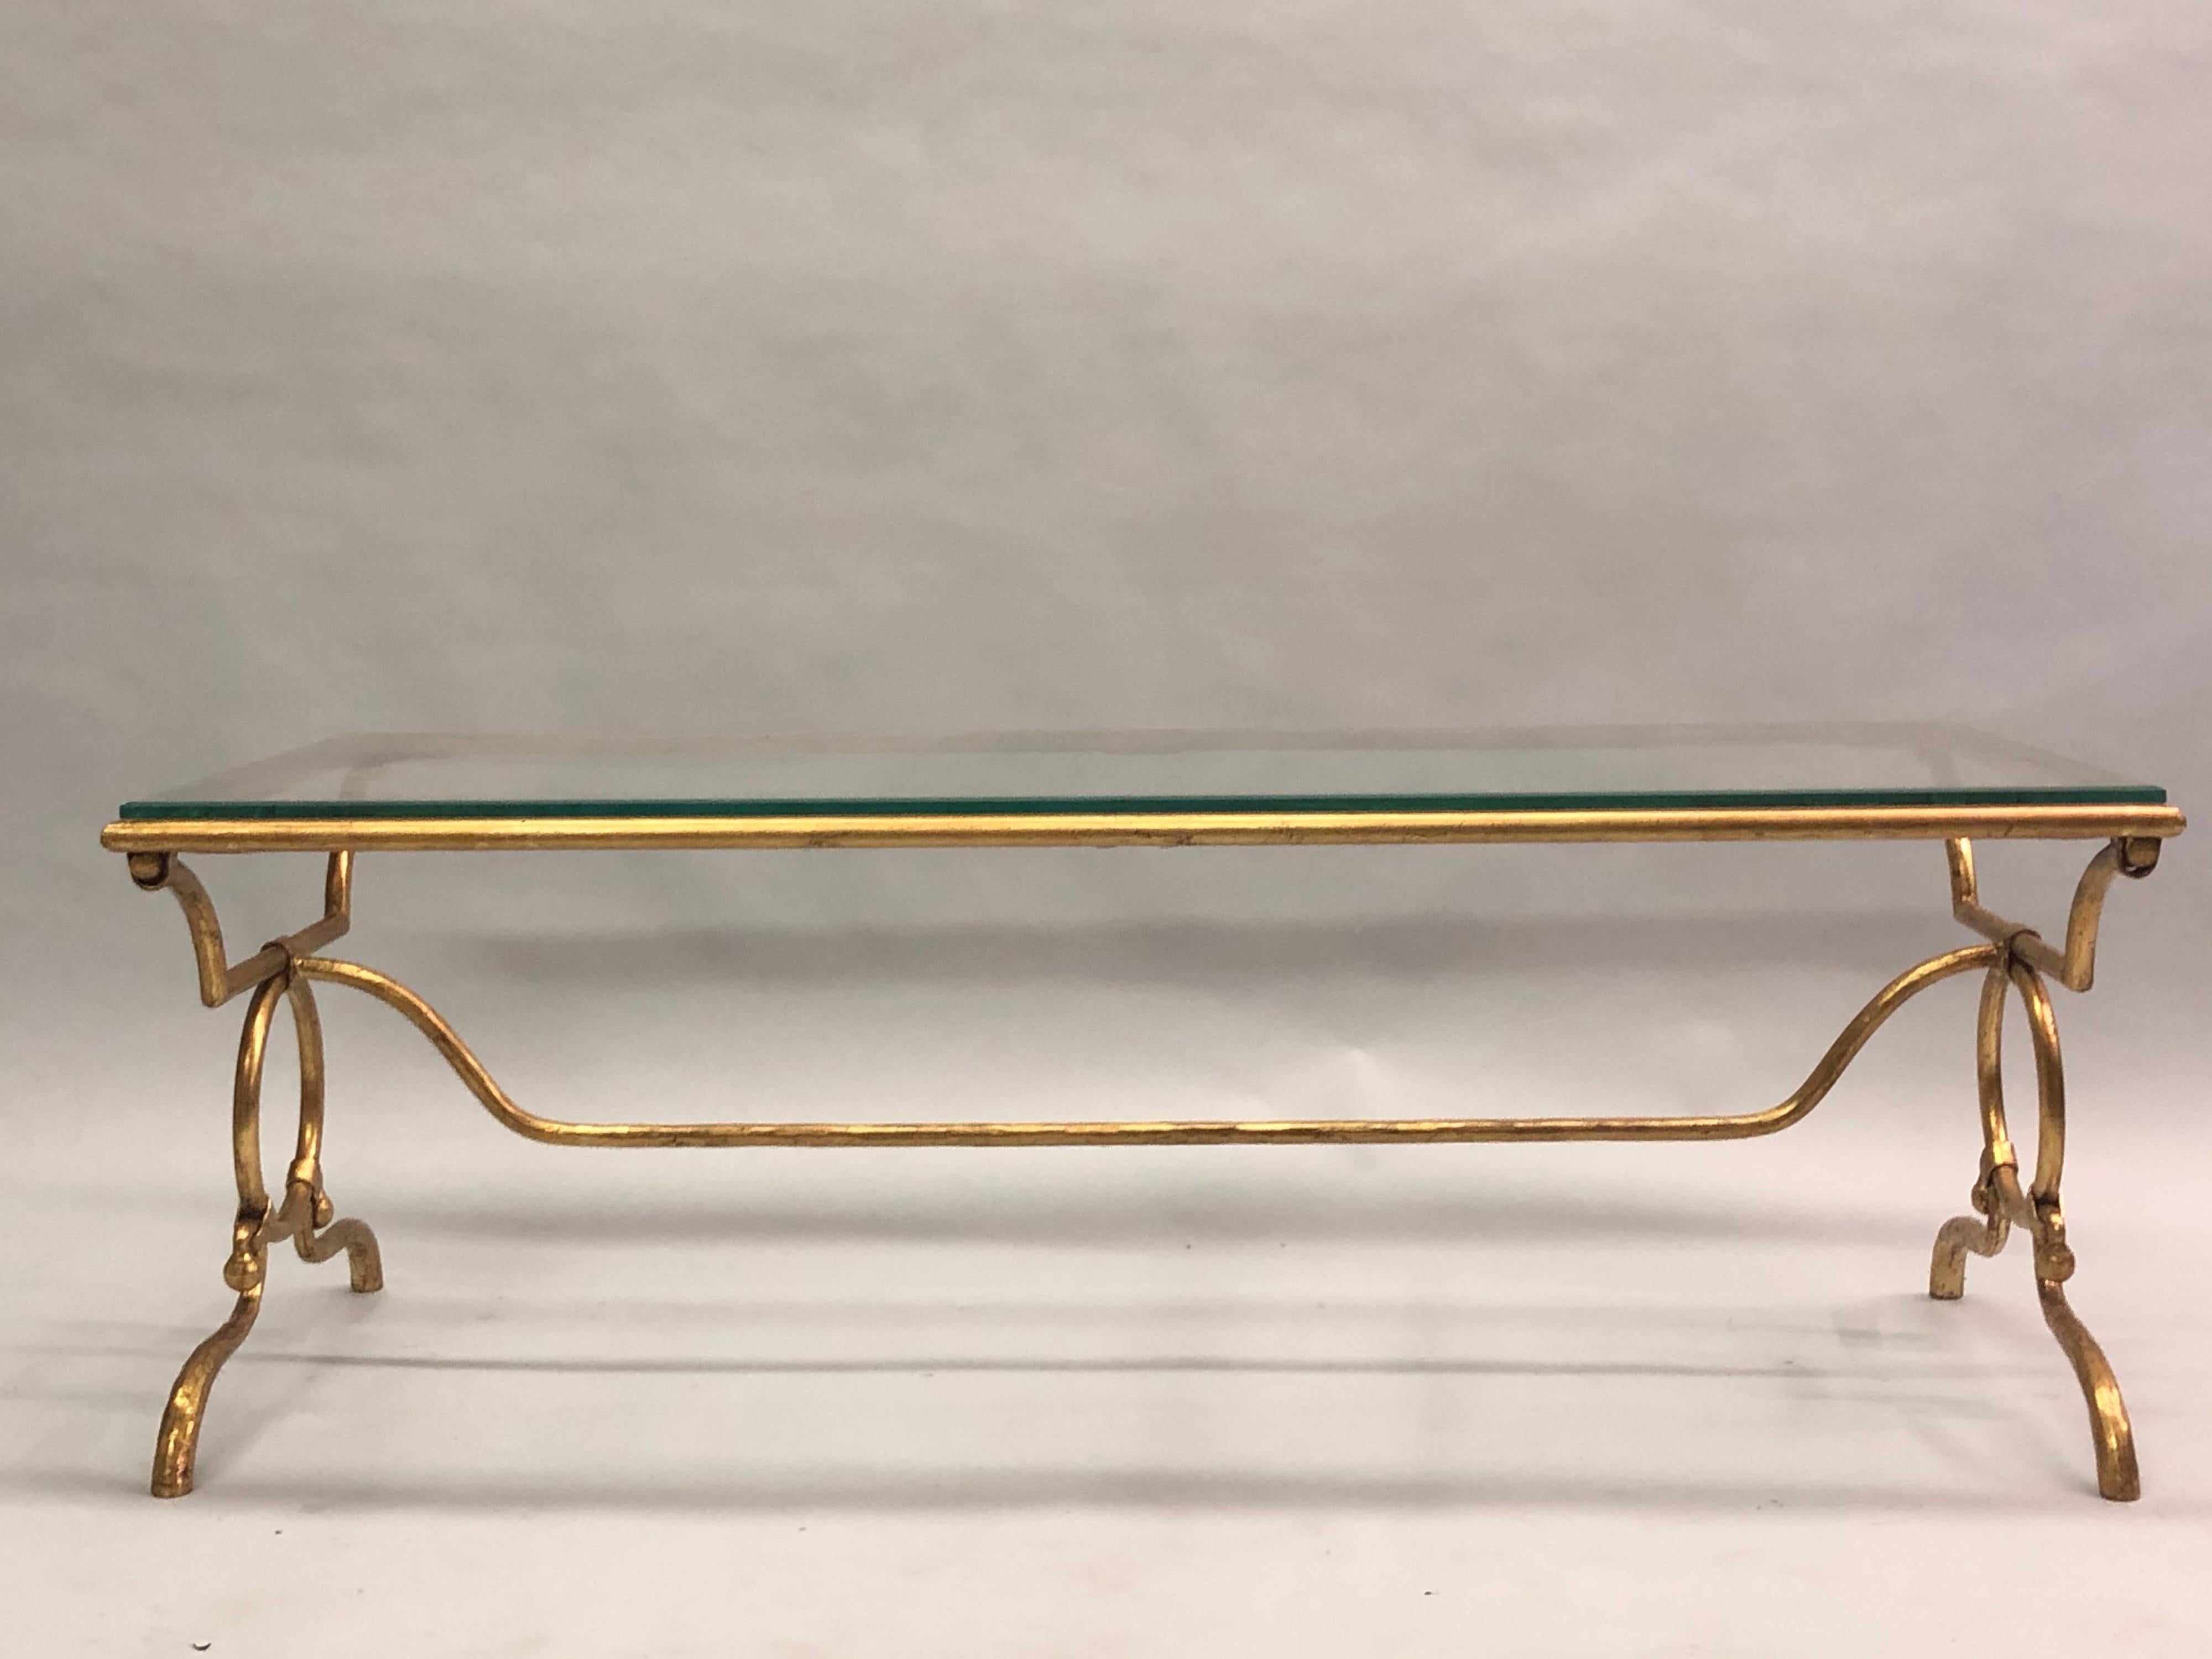 Italian Mid-Century Modern neoclassical gilt iron cocktail table by Giovanni Banci for Hermès with a pair of Hermès Classic horse bit symbols forming the base. 

The piece is shown without a stone top but a choice of stone tops are available at